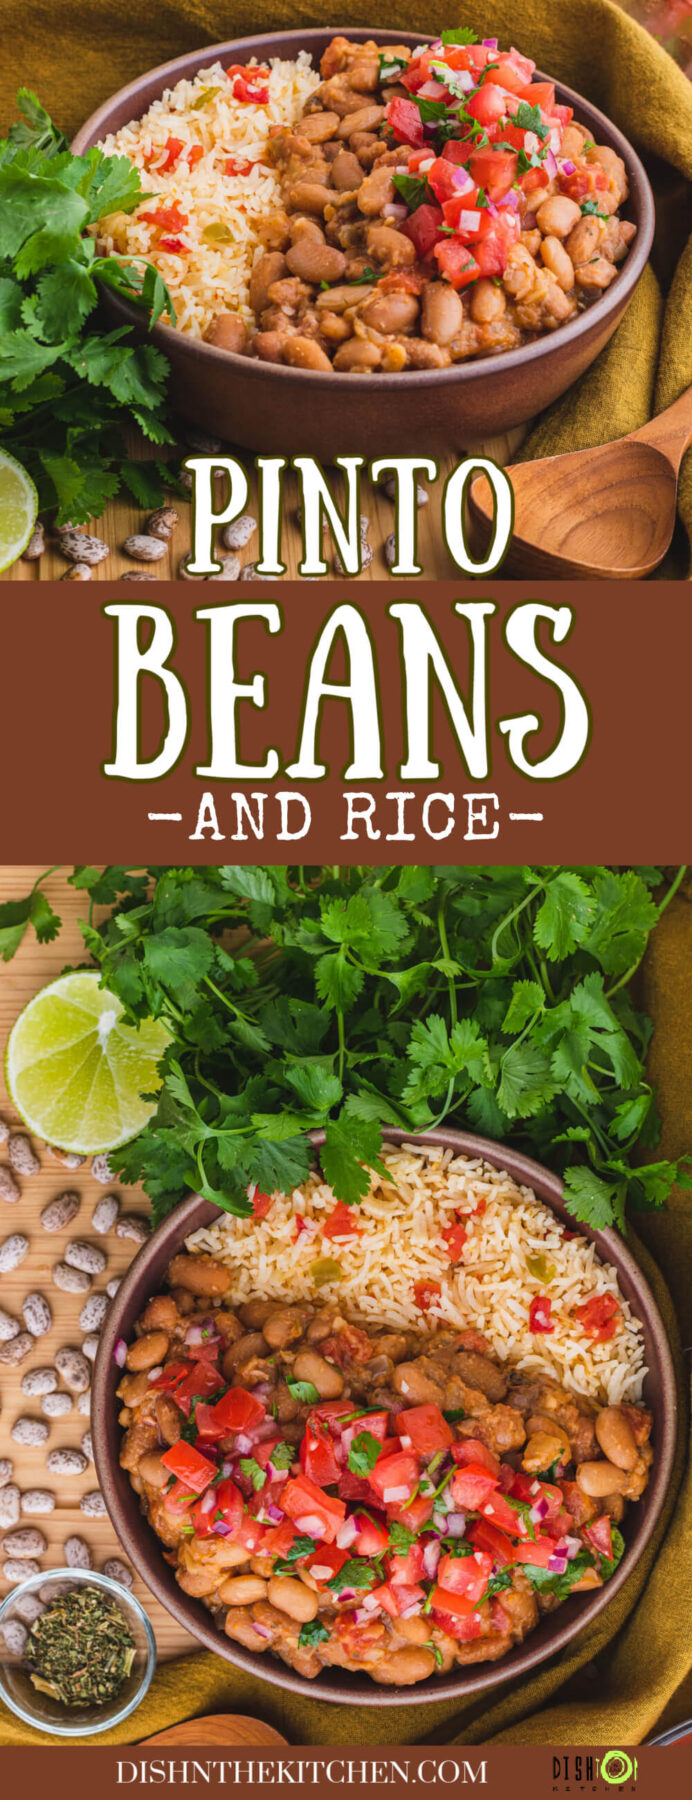 Pinterest image of a bowl of creamy Pinto Beans and Rice surrounded by cilantro, lime, and dried pinto beans.